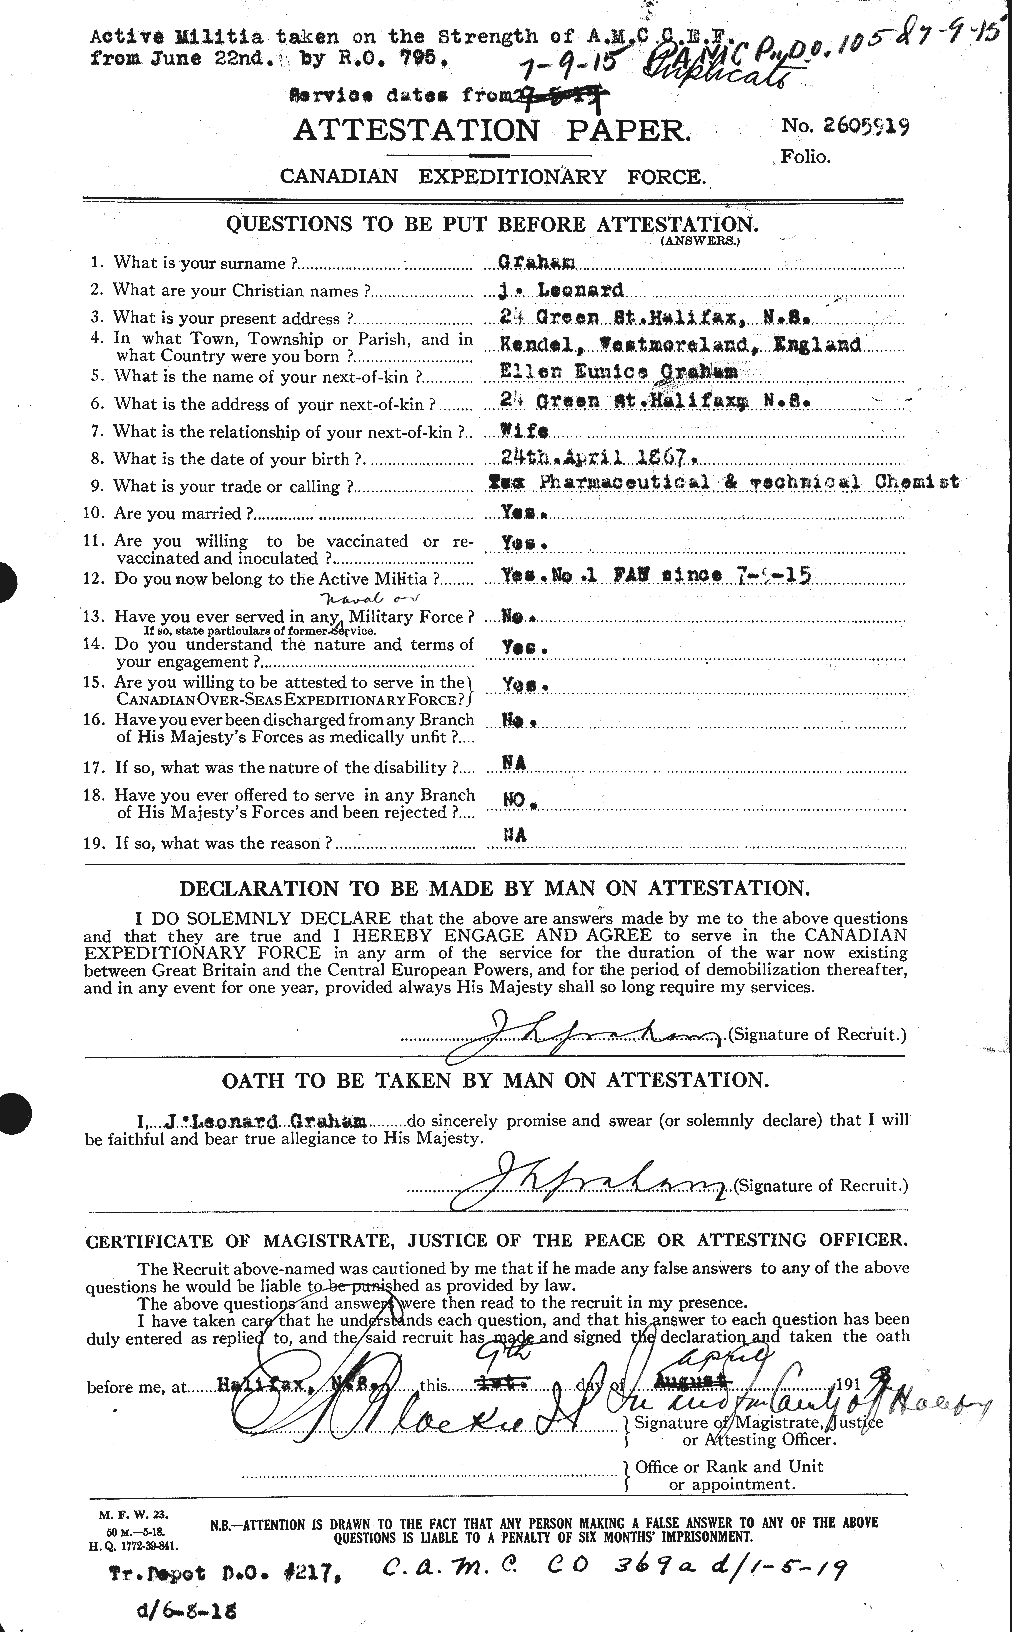 Personnel Records of the First World War - CEF 357770a